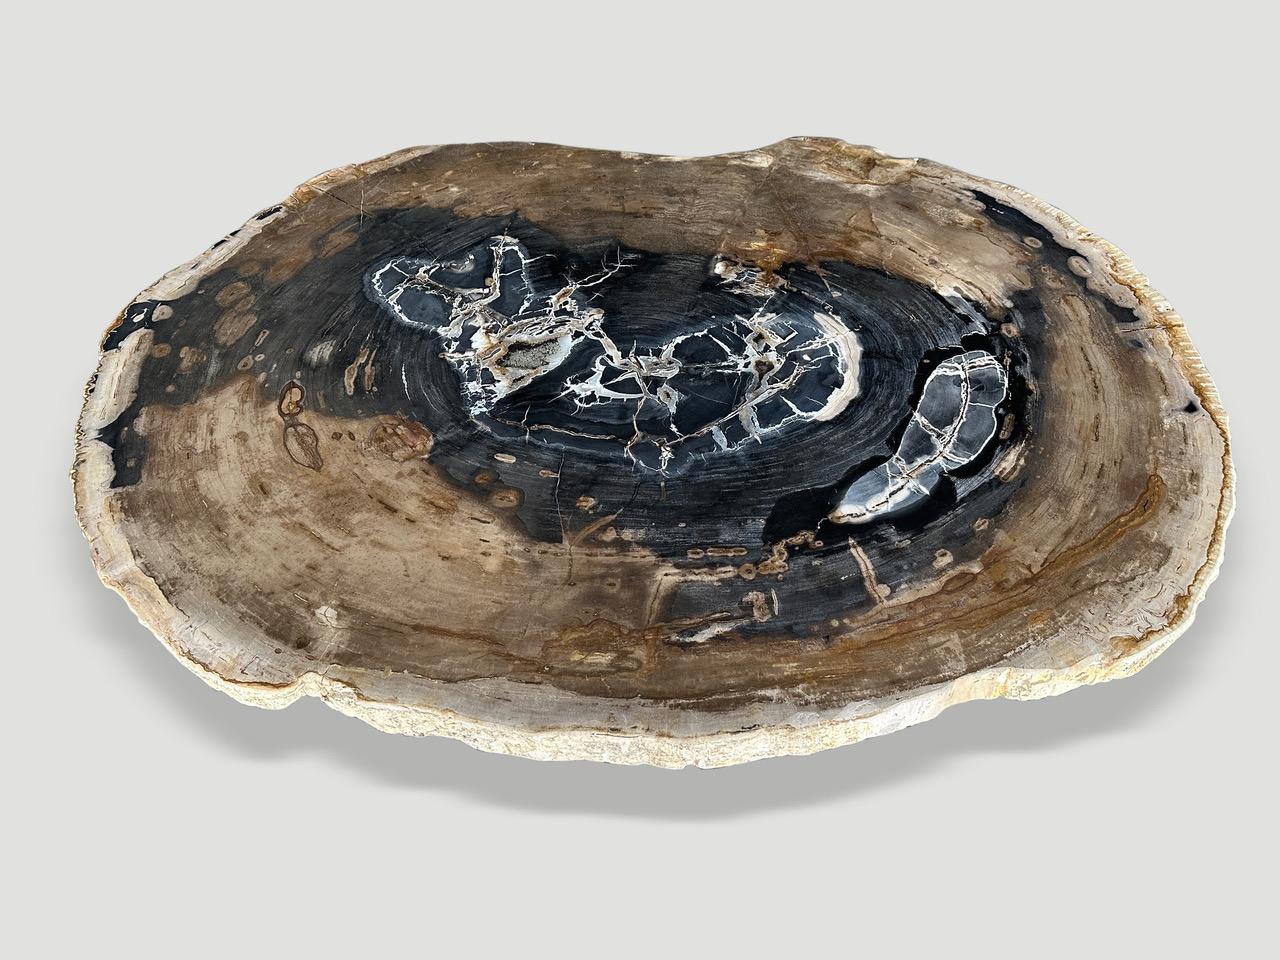 Impressive two and a half inch thick, high quality petrified wood slab coffee table. Resting on an organic natural teak base, this beautiful rare slab has natural crystals embedded in the top. It’s fascinating how Mother Nature produces these